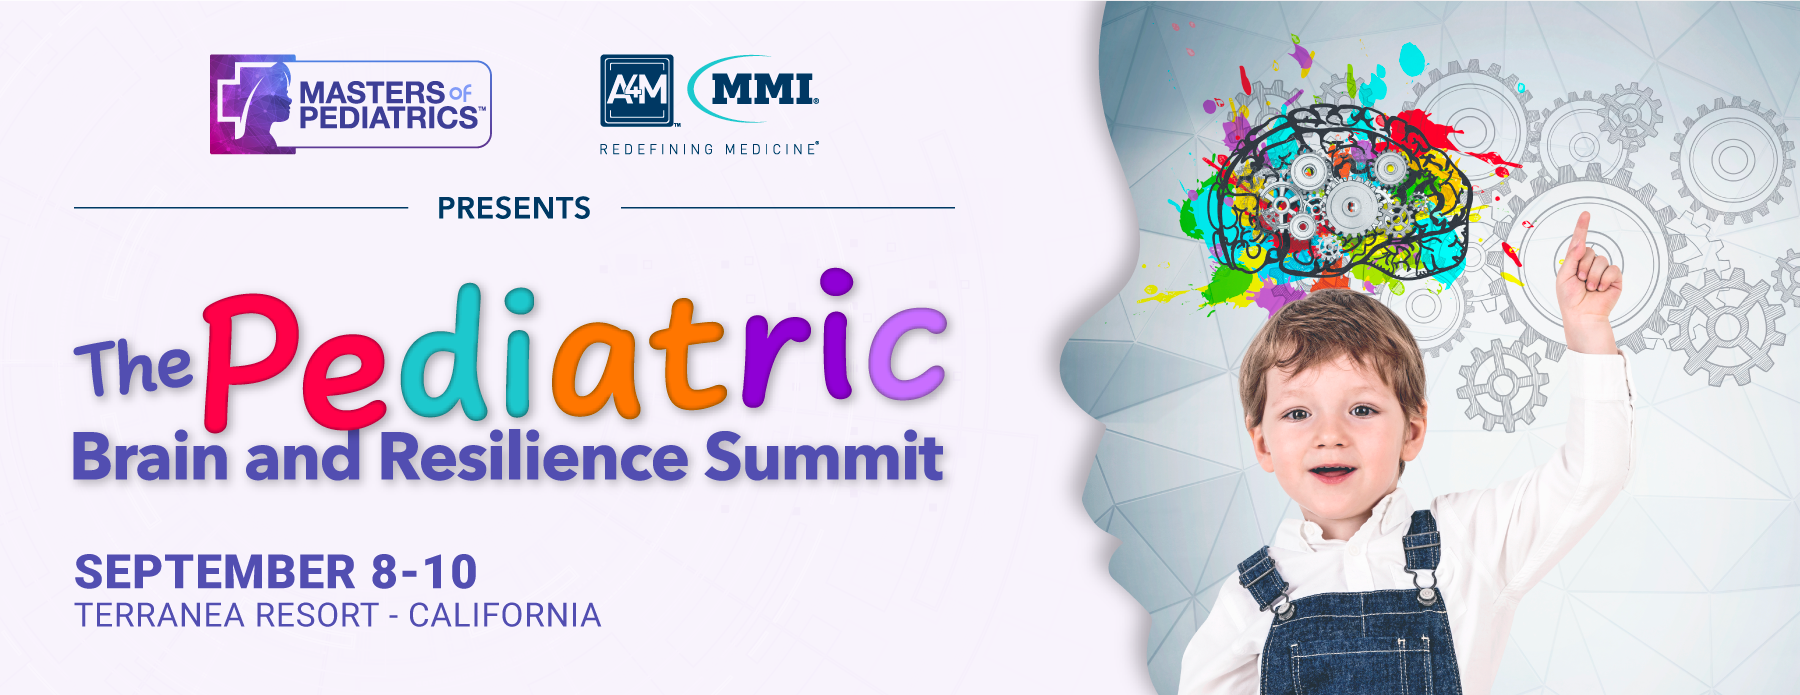 MOP Pediatric Brain and Resilience Summit